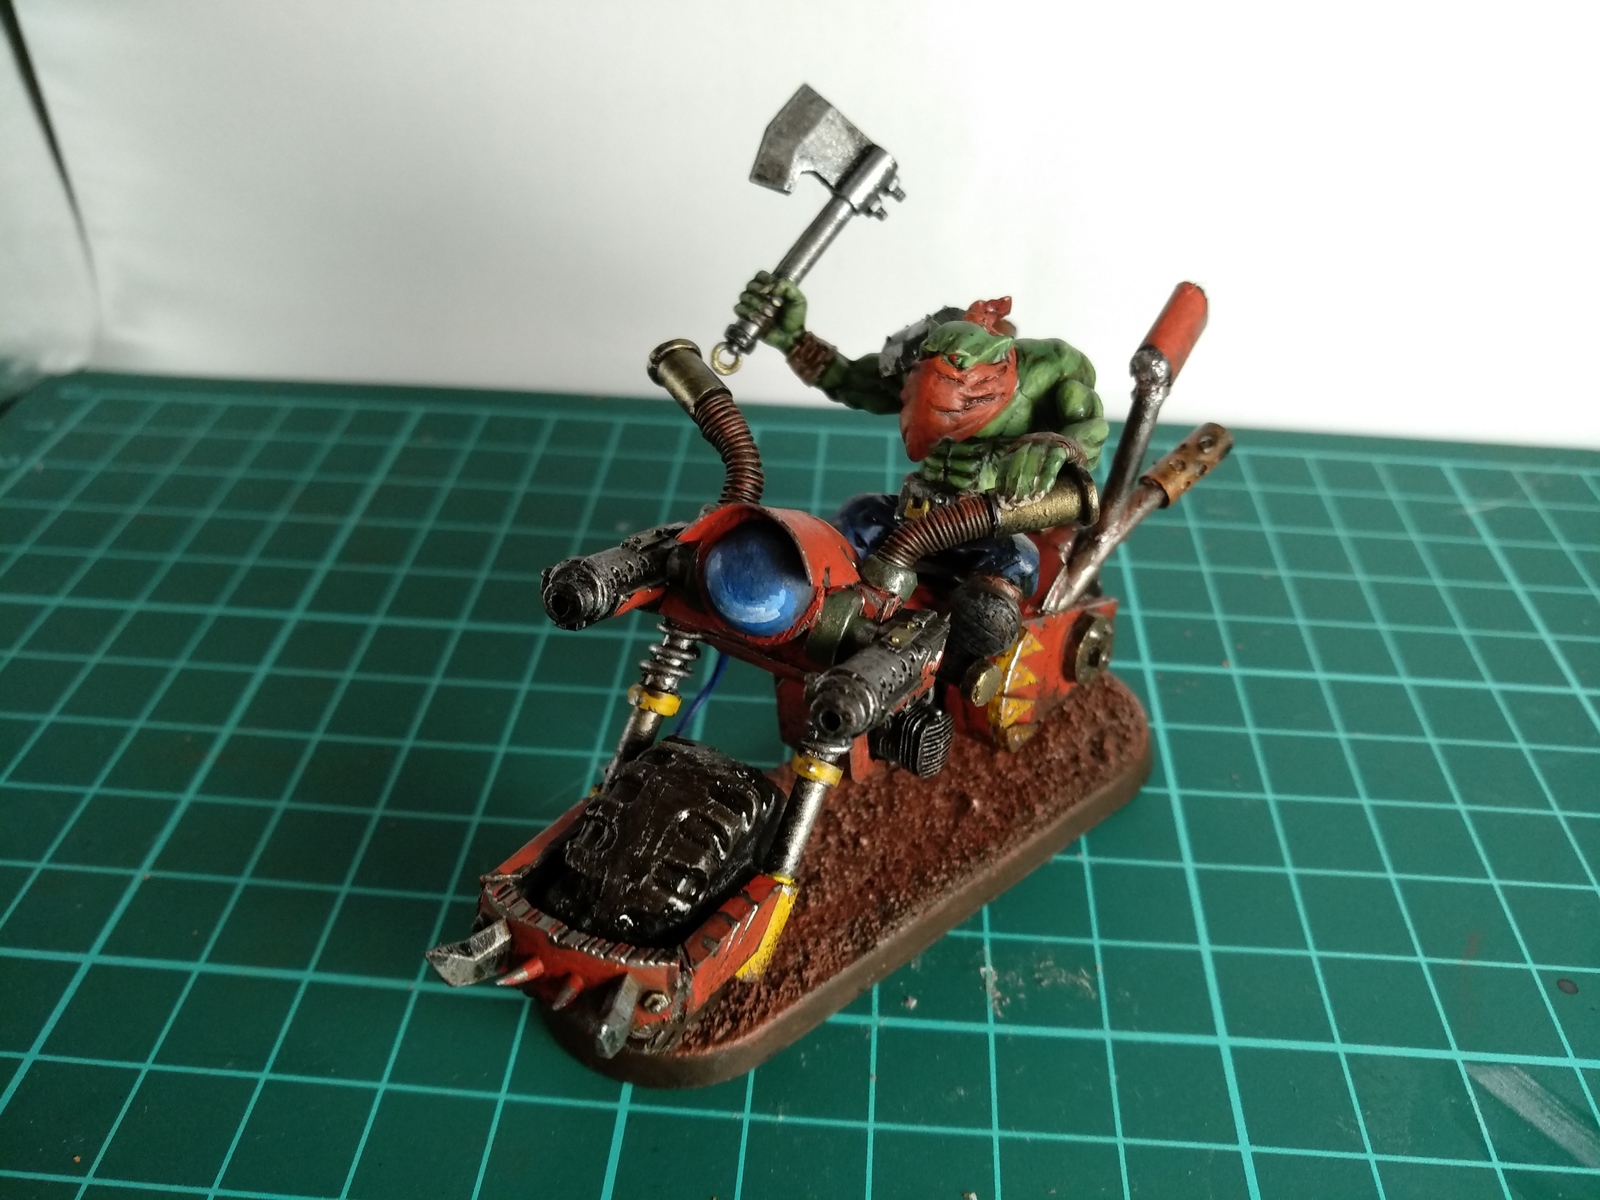 How I decided to play tabletop warhammer. - My, Wh miniatures, Warhammer 40k, Orcs, Painting miniatures, Miniature, Longpost